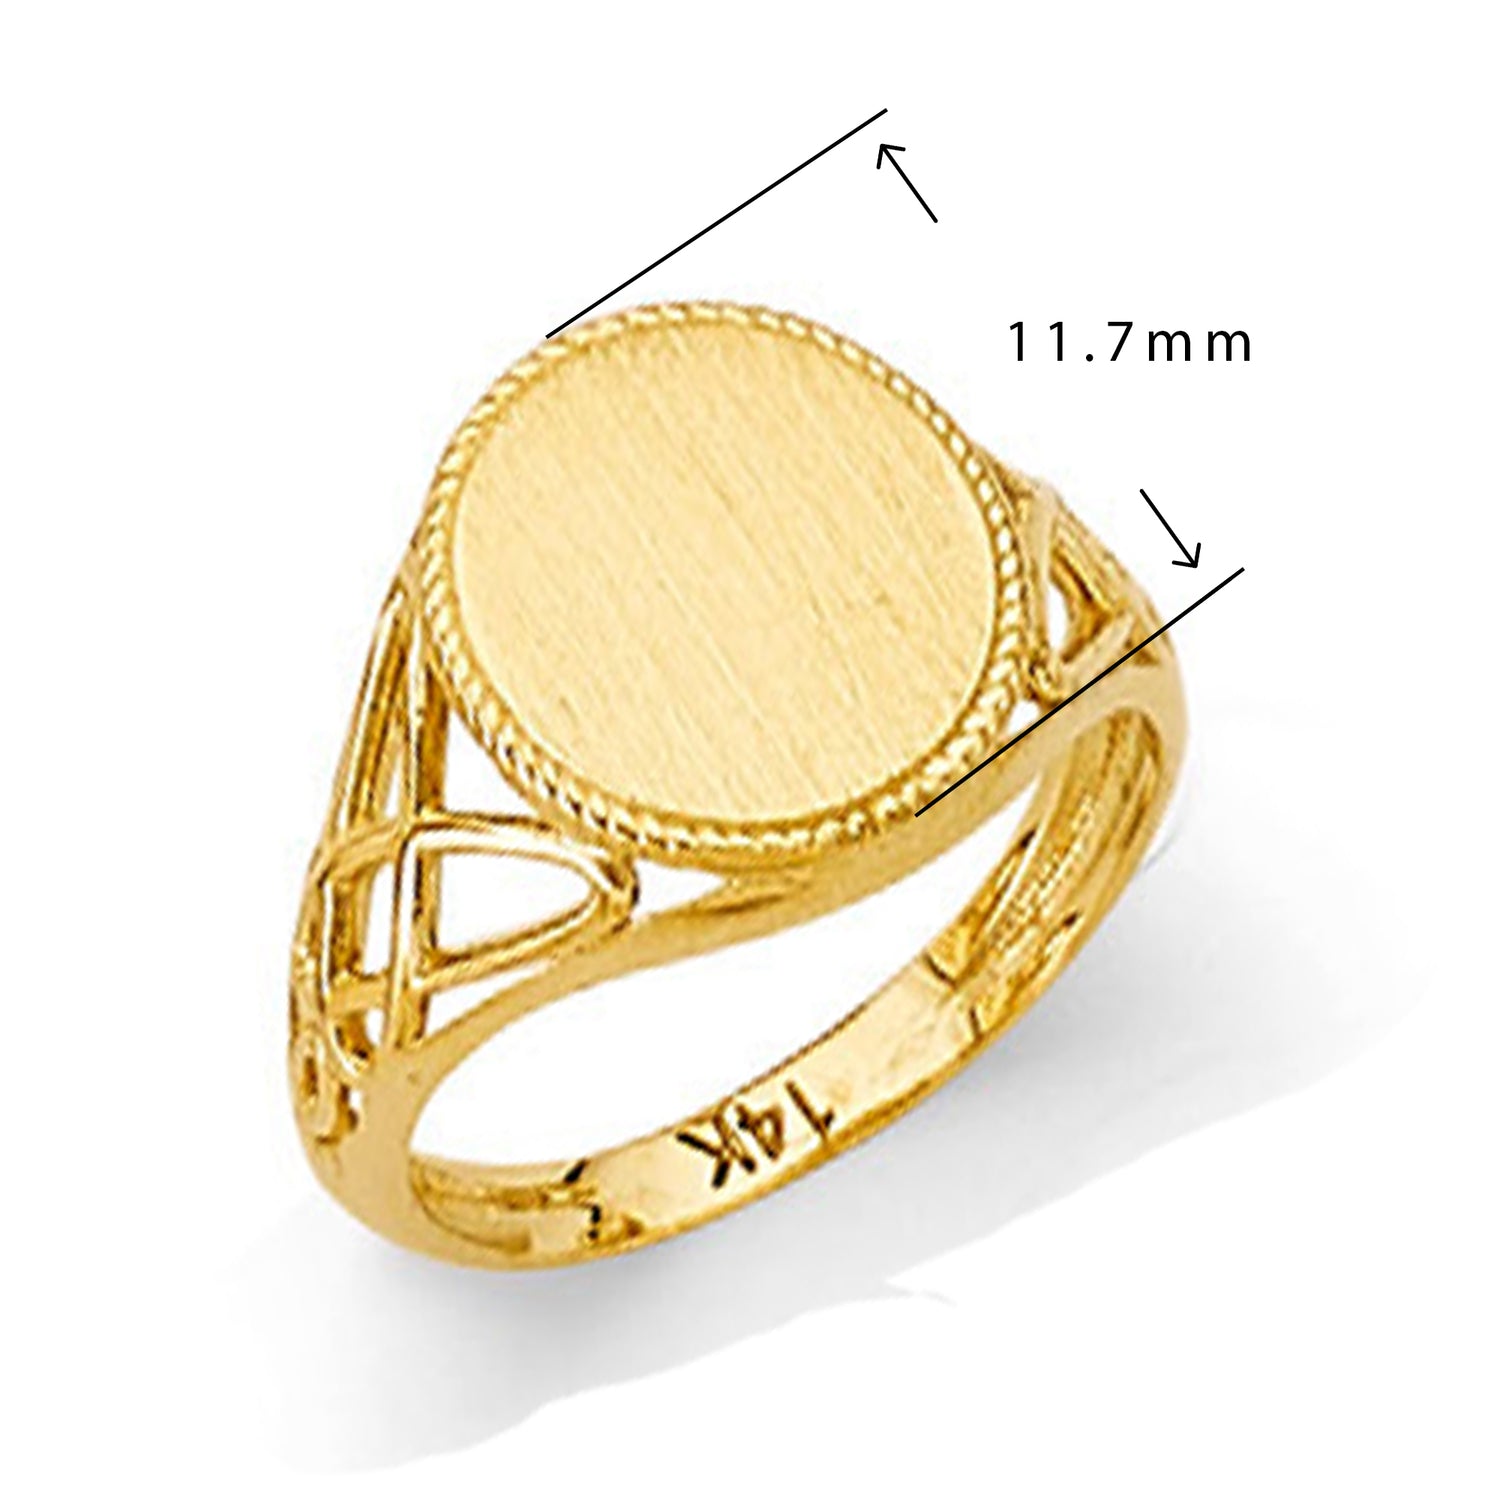 Filigree Round Signet Ring in Solid Gold with Measurement